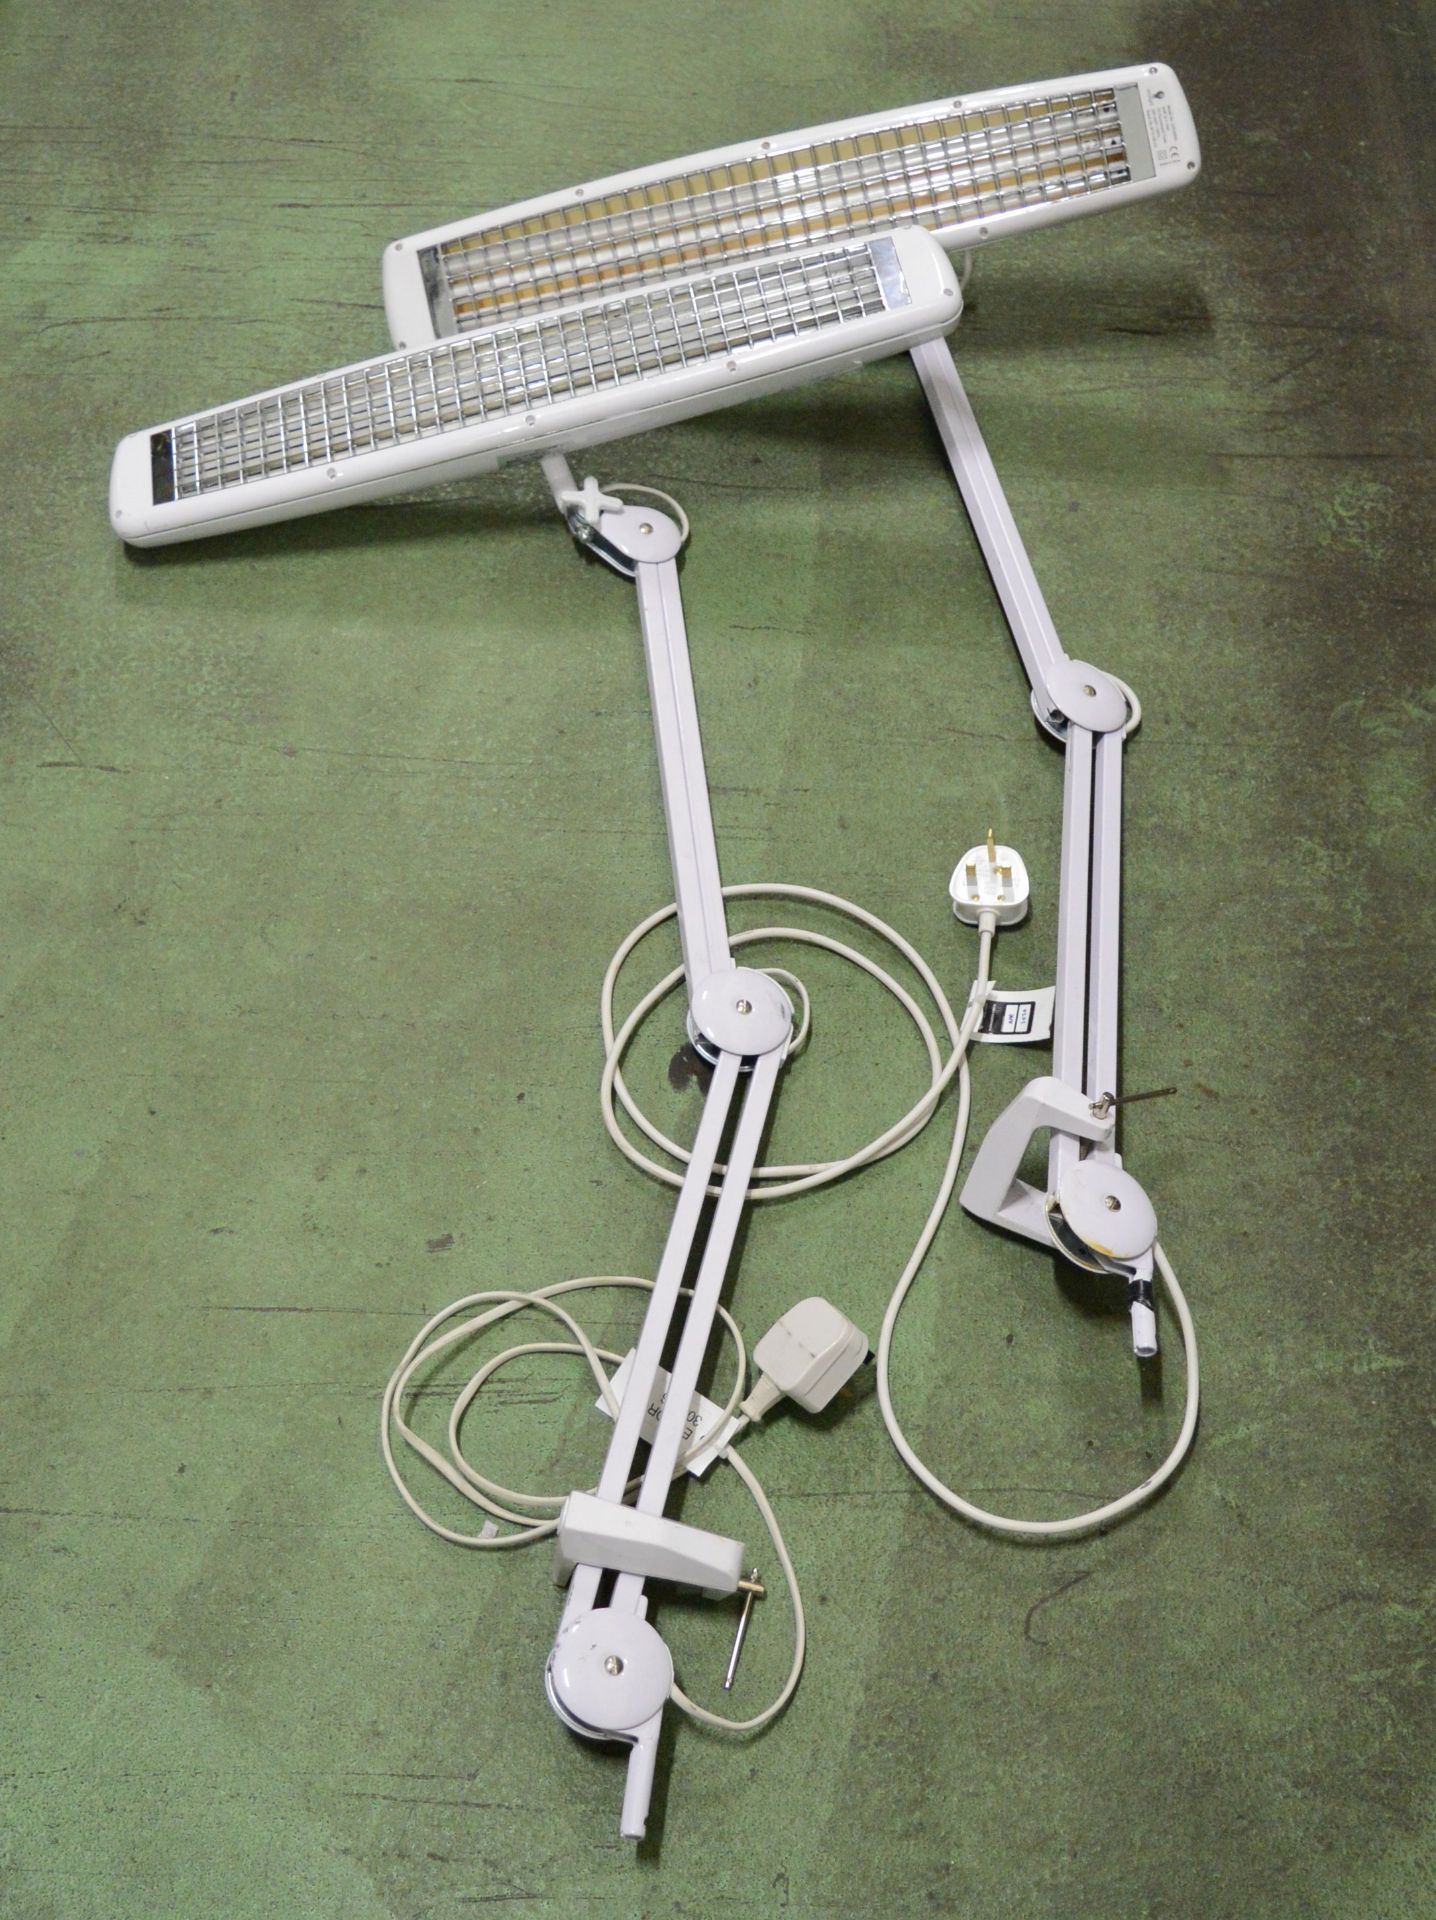 2x Anglepoise Fluorescent Lights.